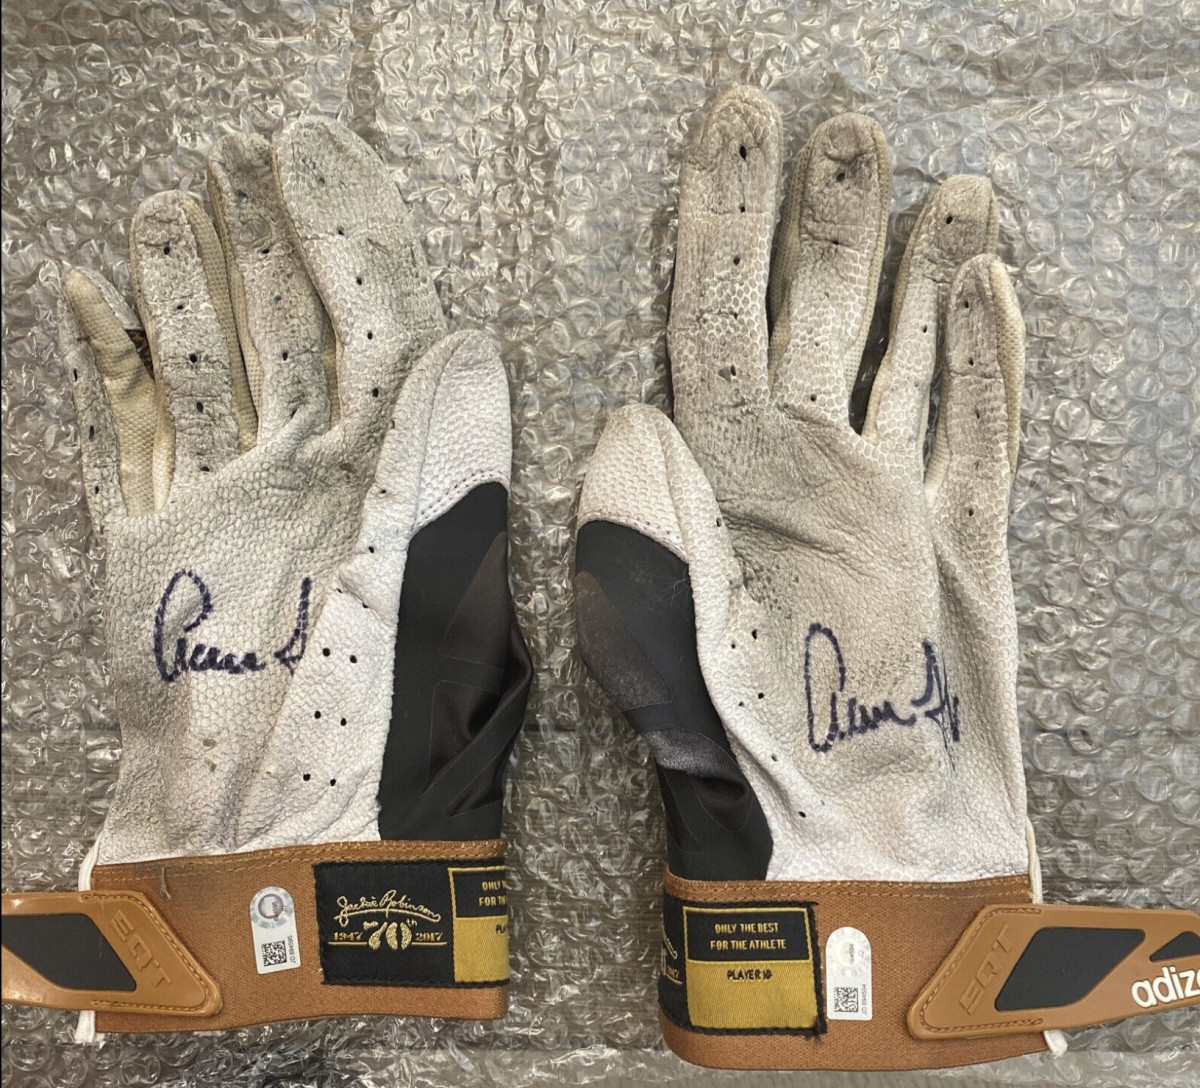 Game-worn batting gloves signed by Aaron Judge.